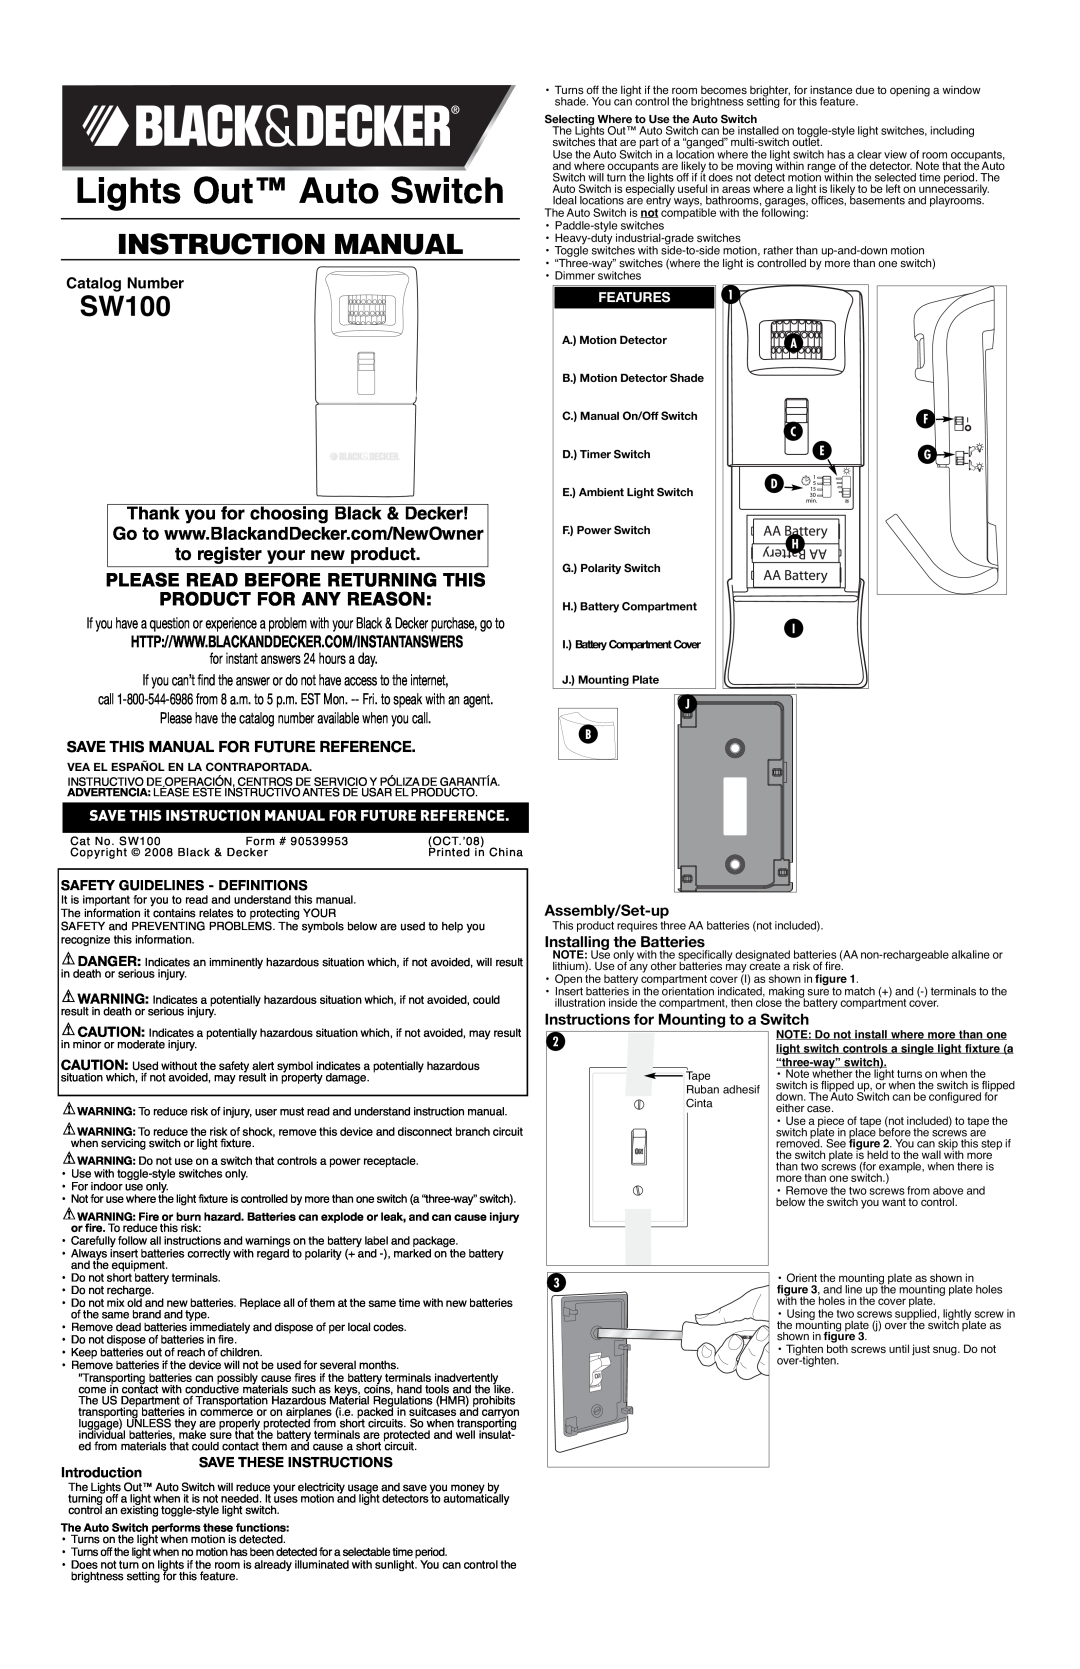 Black & Decker 90539953 instruction manual Lights Out Auto Switch, Instruction Manual, SW100, Assembly/Set-up, Features 